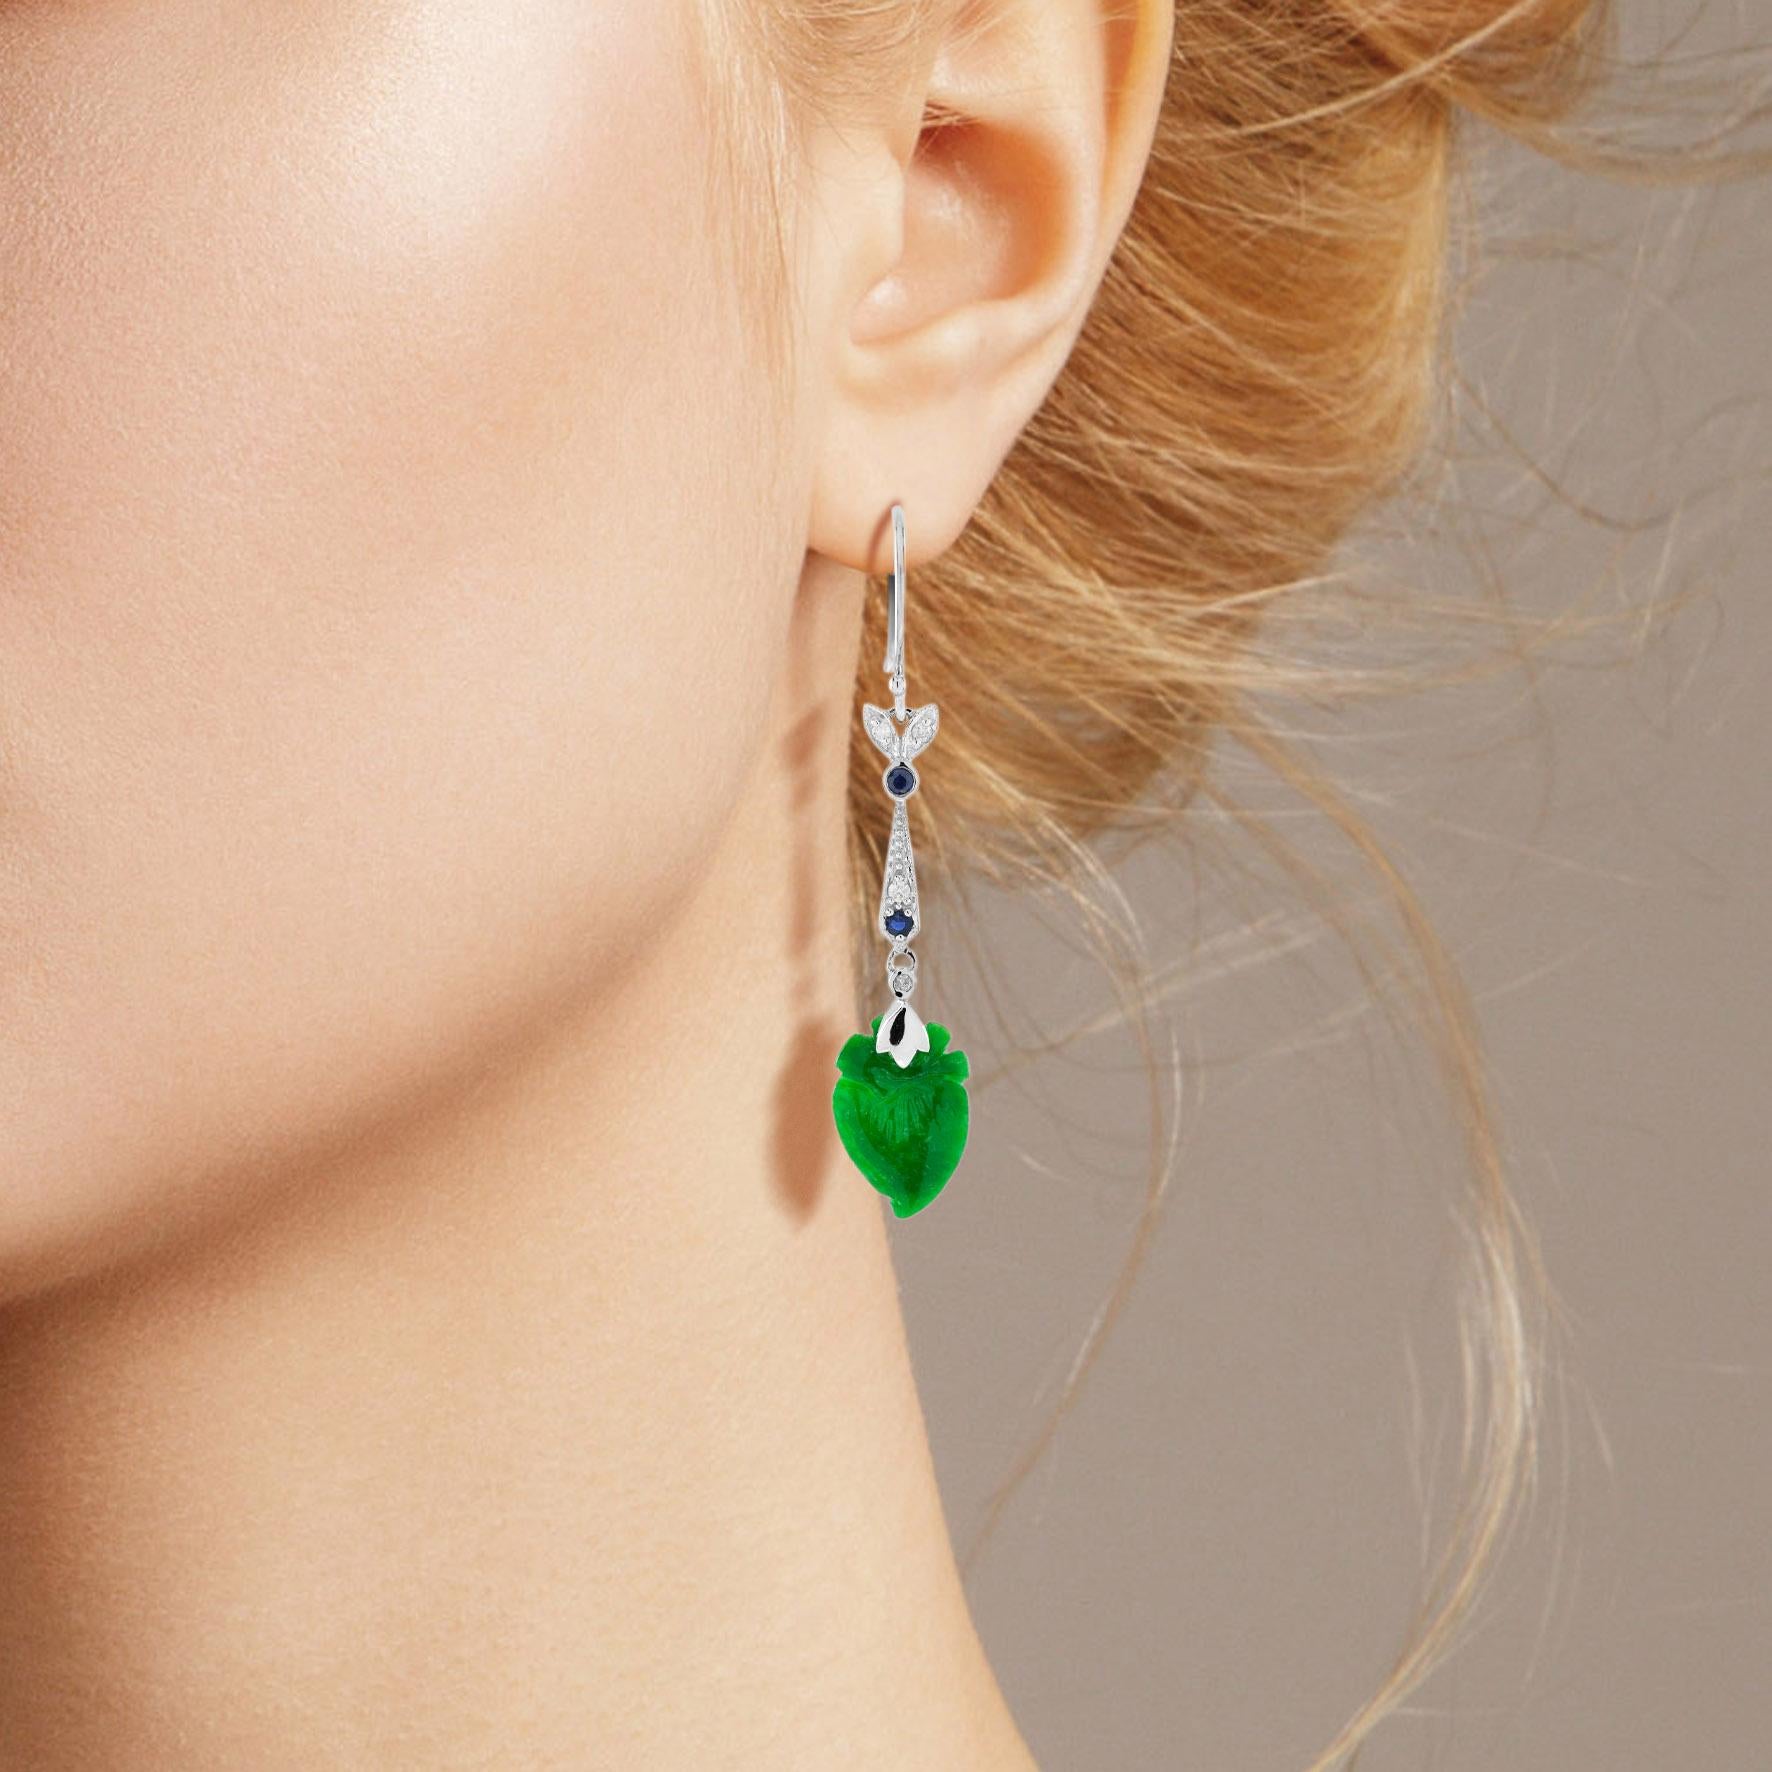 The natural jade in these lovely earrings has some very special shape. Both pieces have a strong green color and well peach fruit carvings. The jade is suspended in a 9k white gold setting with diamond leaf and round blue sapphires on the top. The